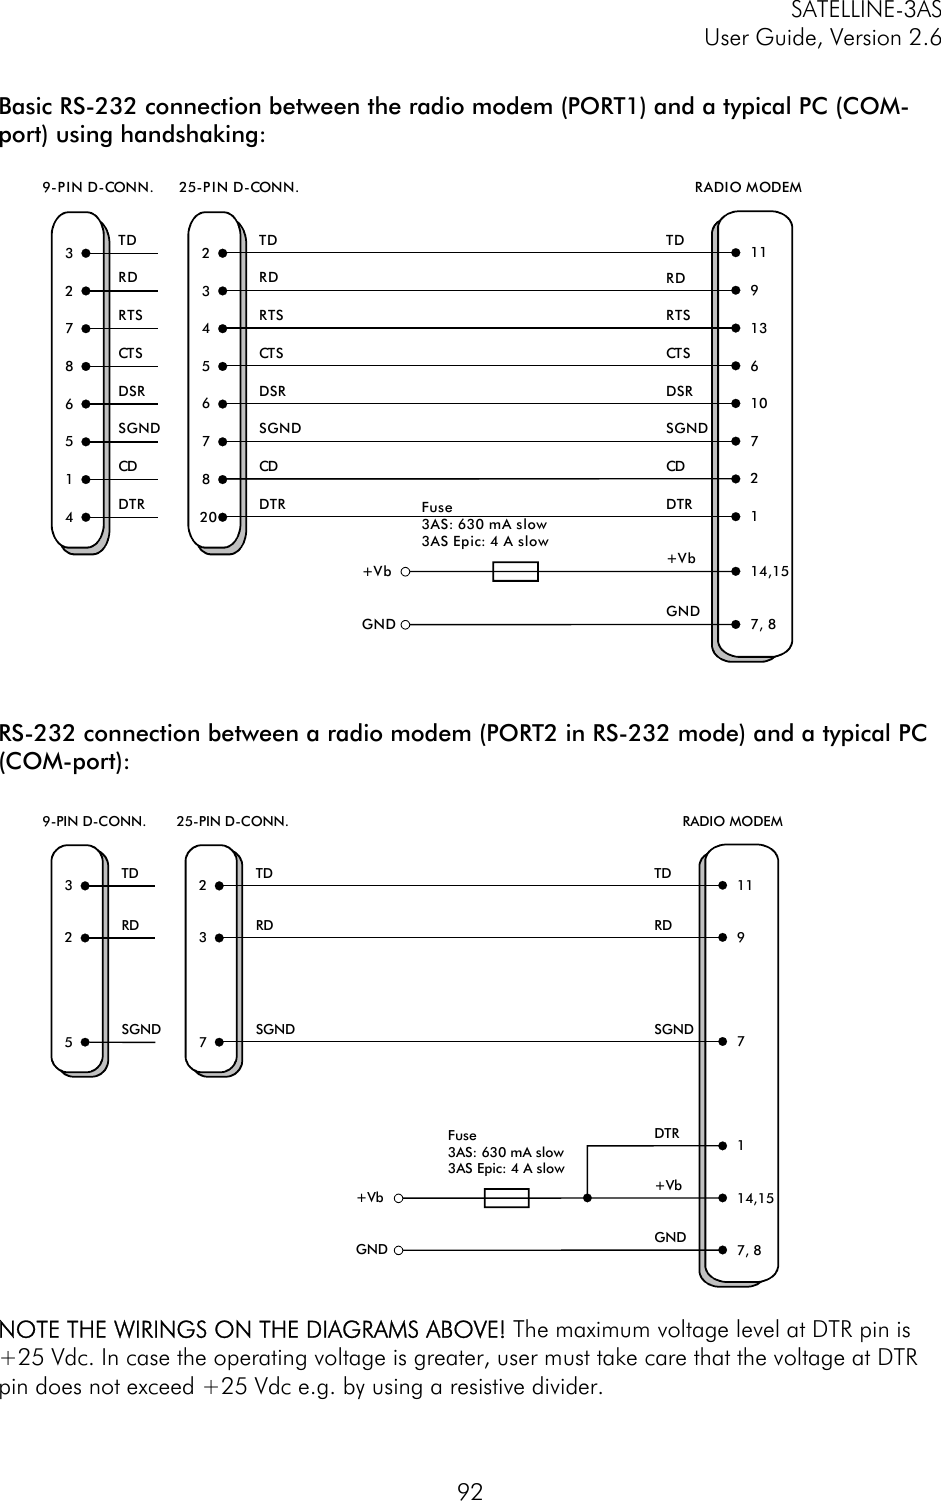 SATELLINE-3AS User Guide, Version 2.6   92 Basic RS-232 connection between the radio modem (PORT1) and a typical PC (COM-port) using handshaking:    RS-232 connection between a radio modem (PORT2 in RS-232 mode) and a typical PC (COM-port):   NOTE THE WIRINGS ON THE DIAGRAMS ABOVE! The maximum voltage level at DTR pin is +25 Vdc. In case the operating voltage is greater, user must take care that the voltage at DTR pin does not exceed +25 Vdc e.g. by using a resistive divider. 9-PIN D-CONN. 25-PIN D-CONN. RADIO MODEM14,157, 8+VbGND3 2 TD 11+VbGND2 3 RD 97 4 RTS 138 5 CT S 666DSR 105 7 SGND 71 8 CD 2420 DTR 1TDRDRTSCT SDSRSGNDCDDTRTDRDRTSCT SDSRSGNDCDDTR Fuse 3AS: 630 mA slow3AS Epic: 4 A slow325TDRDSGND9-PIN D-CONN.237TDRDSGND25-PIN D-CONN.TDRDSGND11RADIO MODEM97114,157, 8DTR+VbGND+VbGNDFuse 3AS: 630 mA slow3AS Epic: 4 A slow